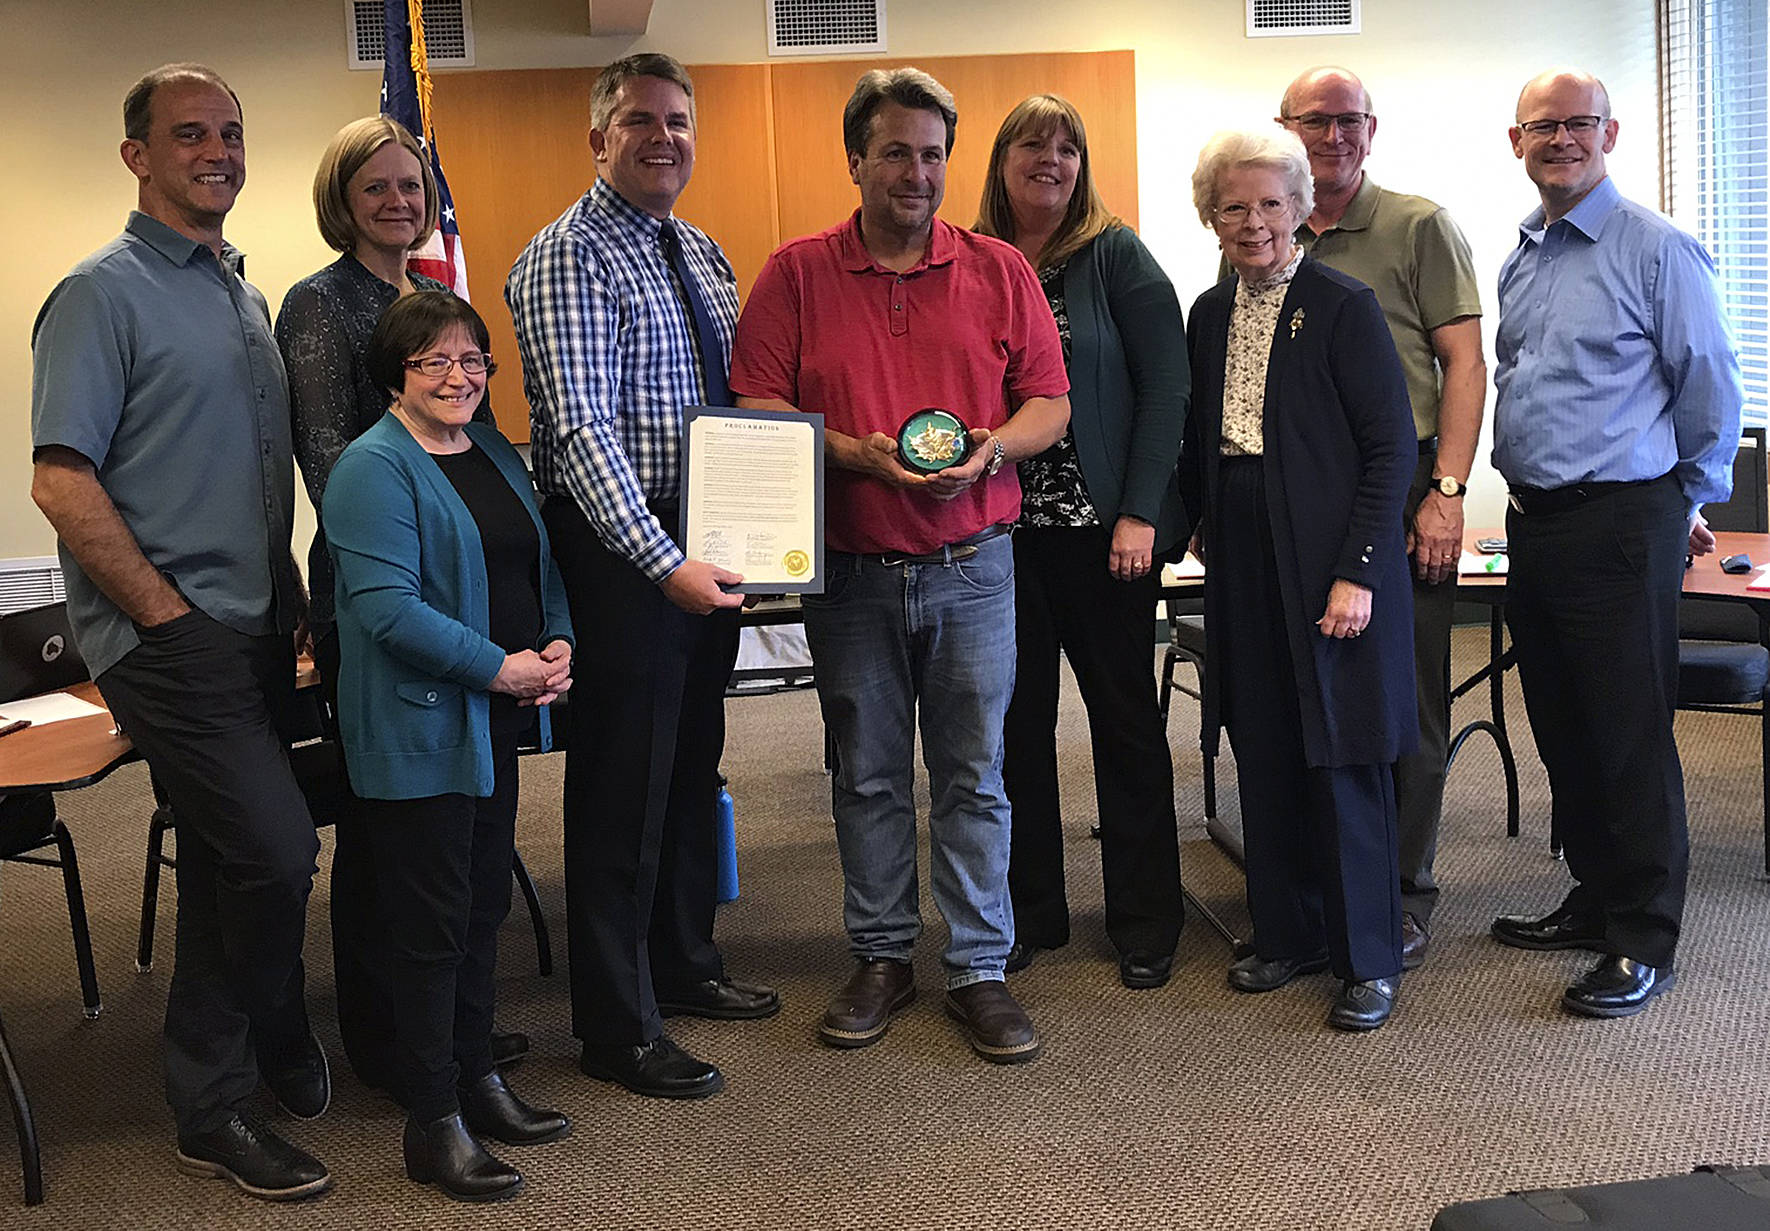 Photo by Kayse Angel                                 Maple Valley community member Brett Habenicht received the Golden Maple Leaf Award during the May 28 Special City Council Meeting.